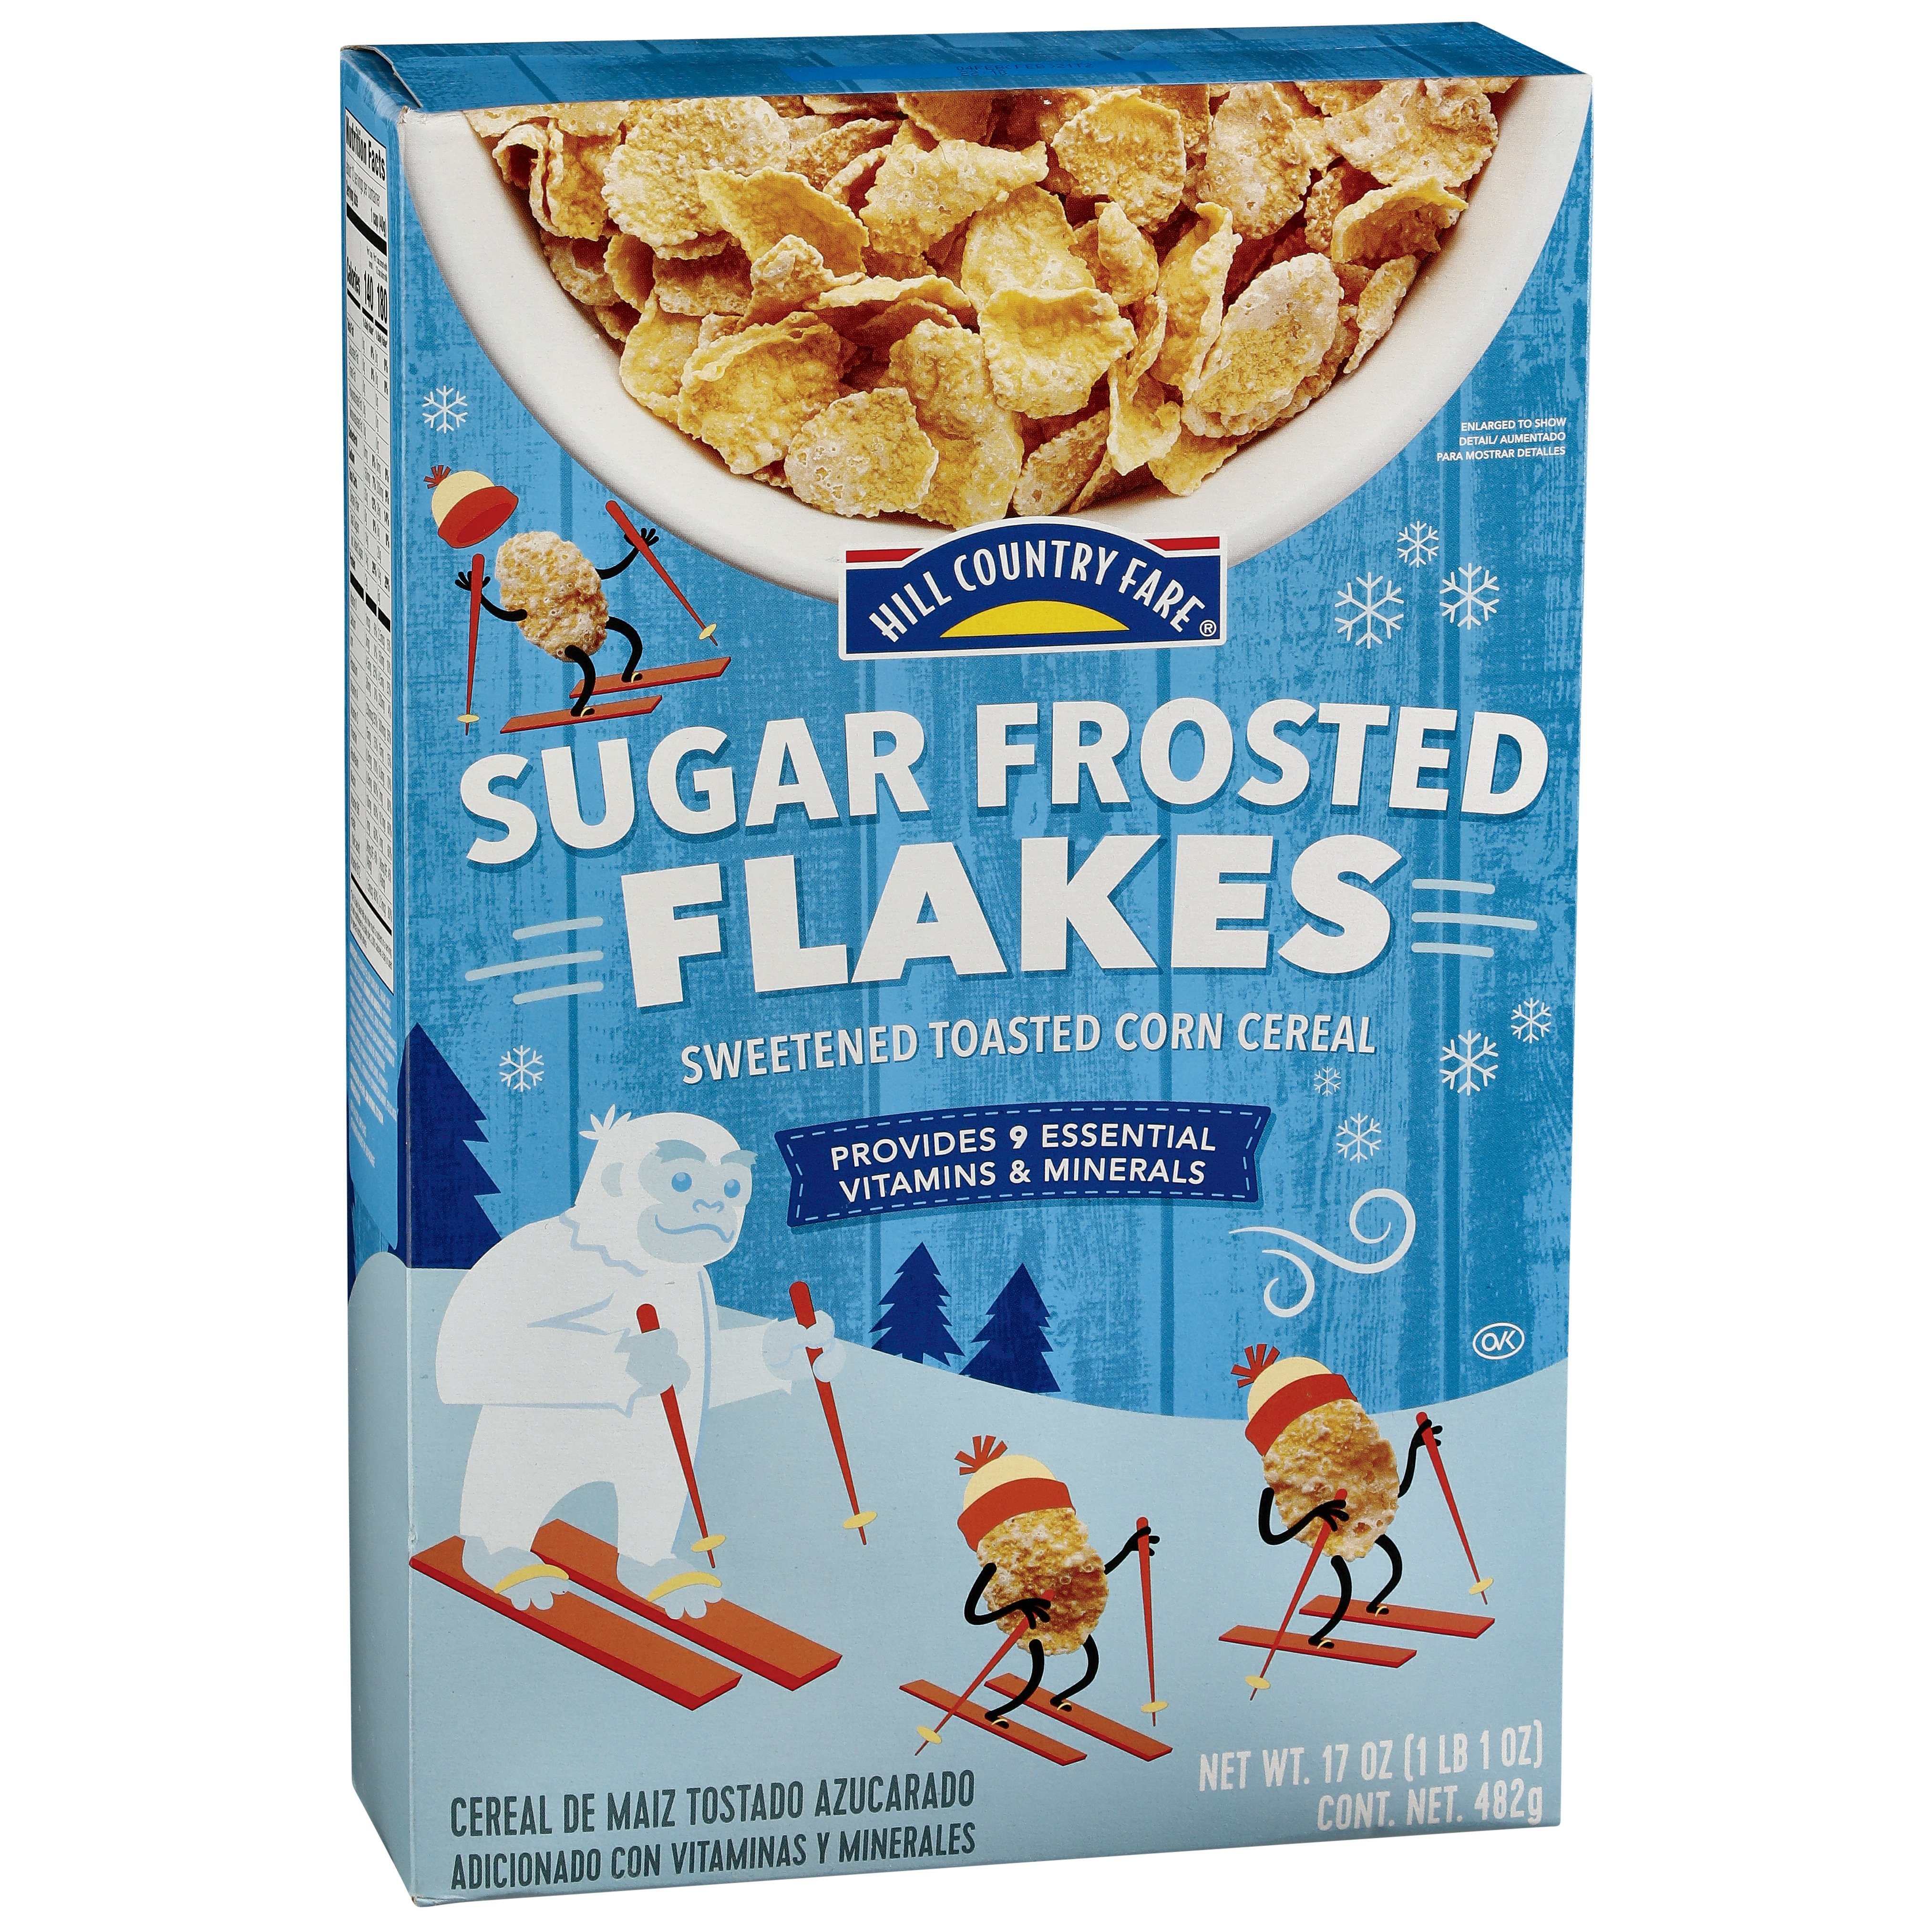 Frosted Flakes Sweetened Flakes of Corn Cereal 14.5 oz